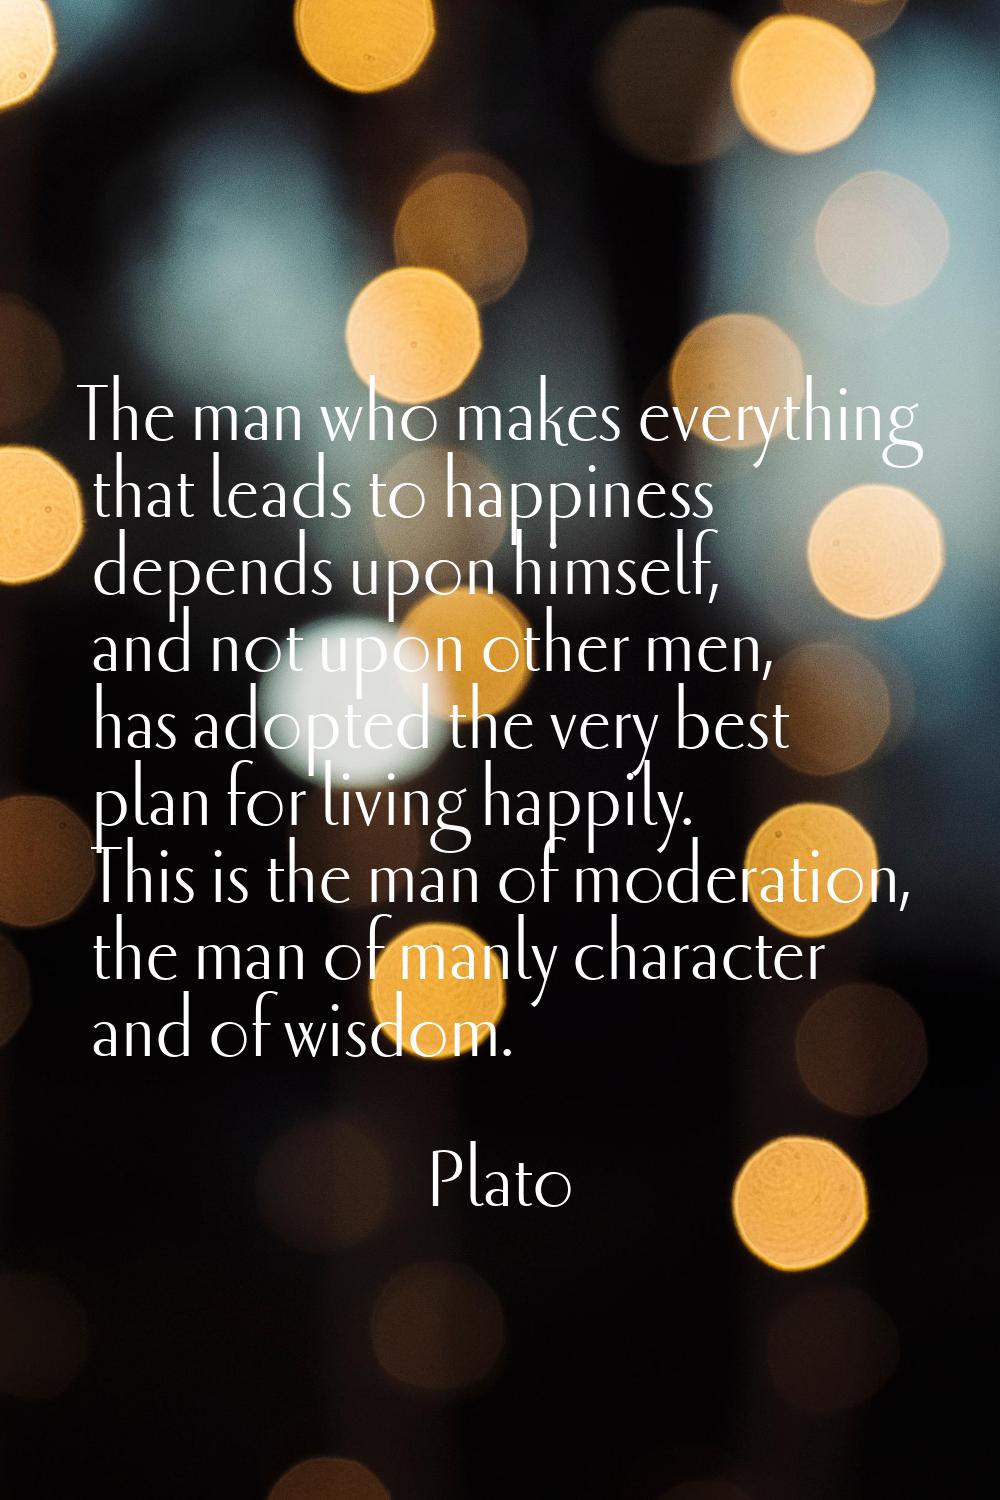 The man who makes everything that leads to happiness depends upon himself, and not upon other men, 